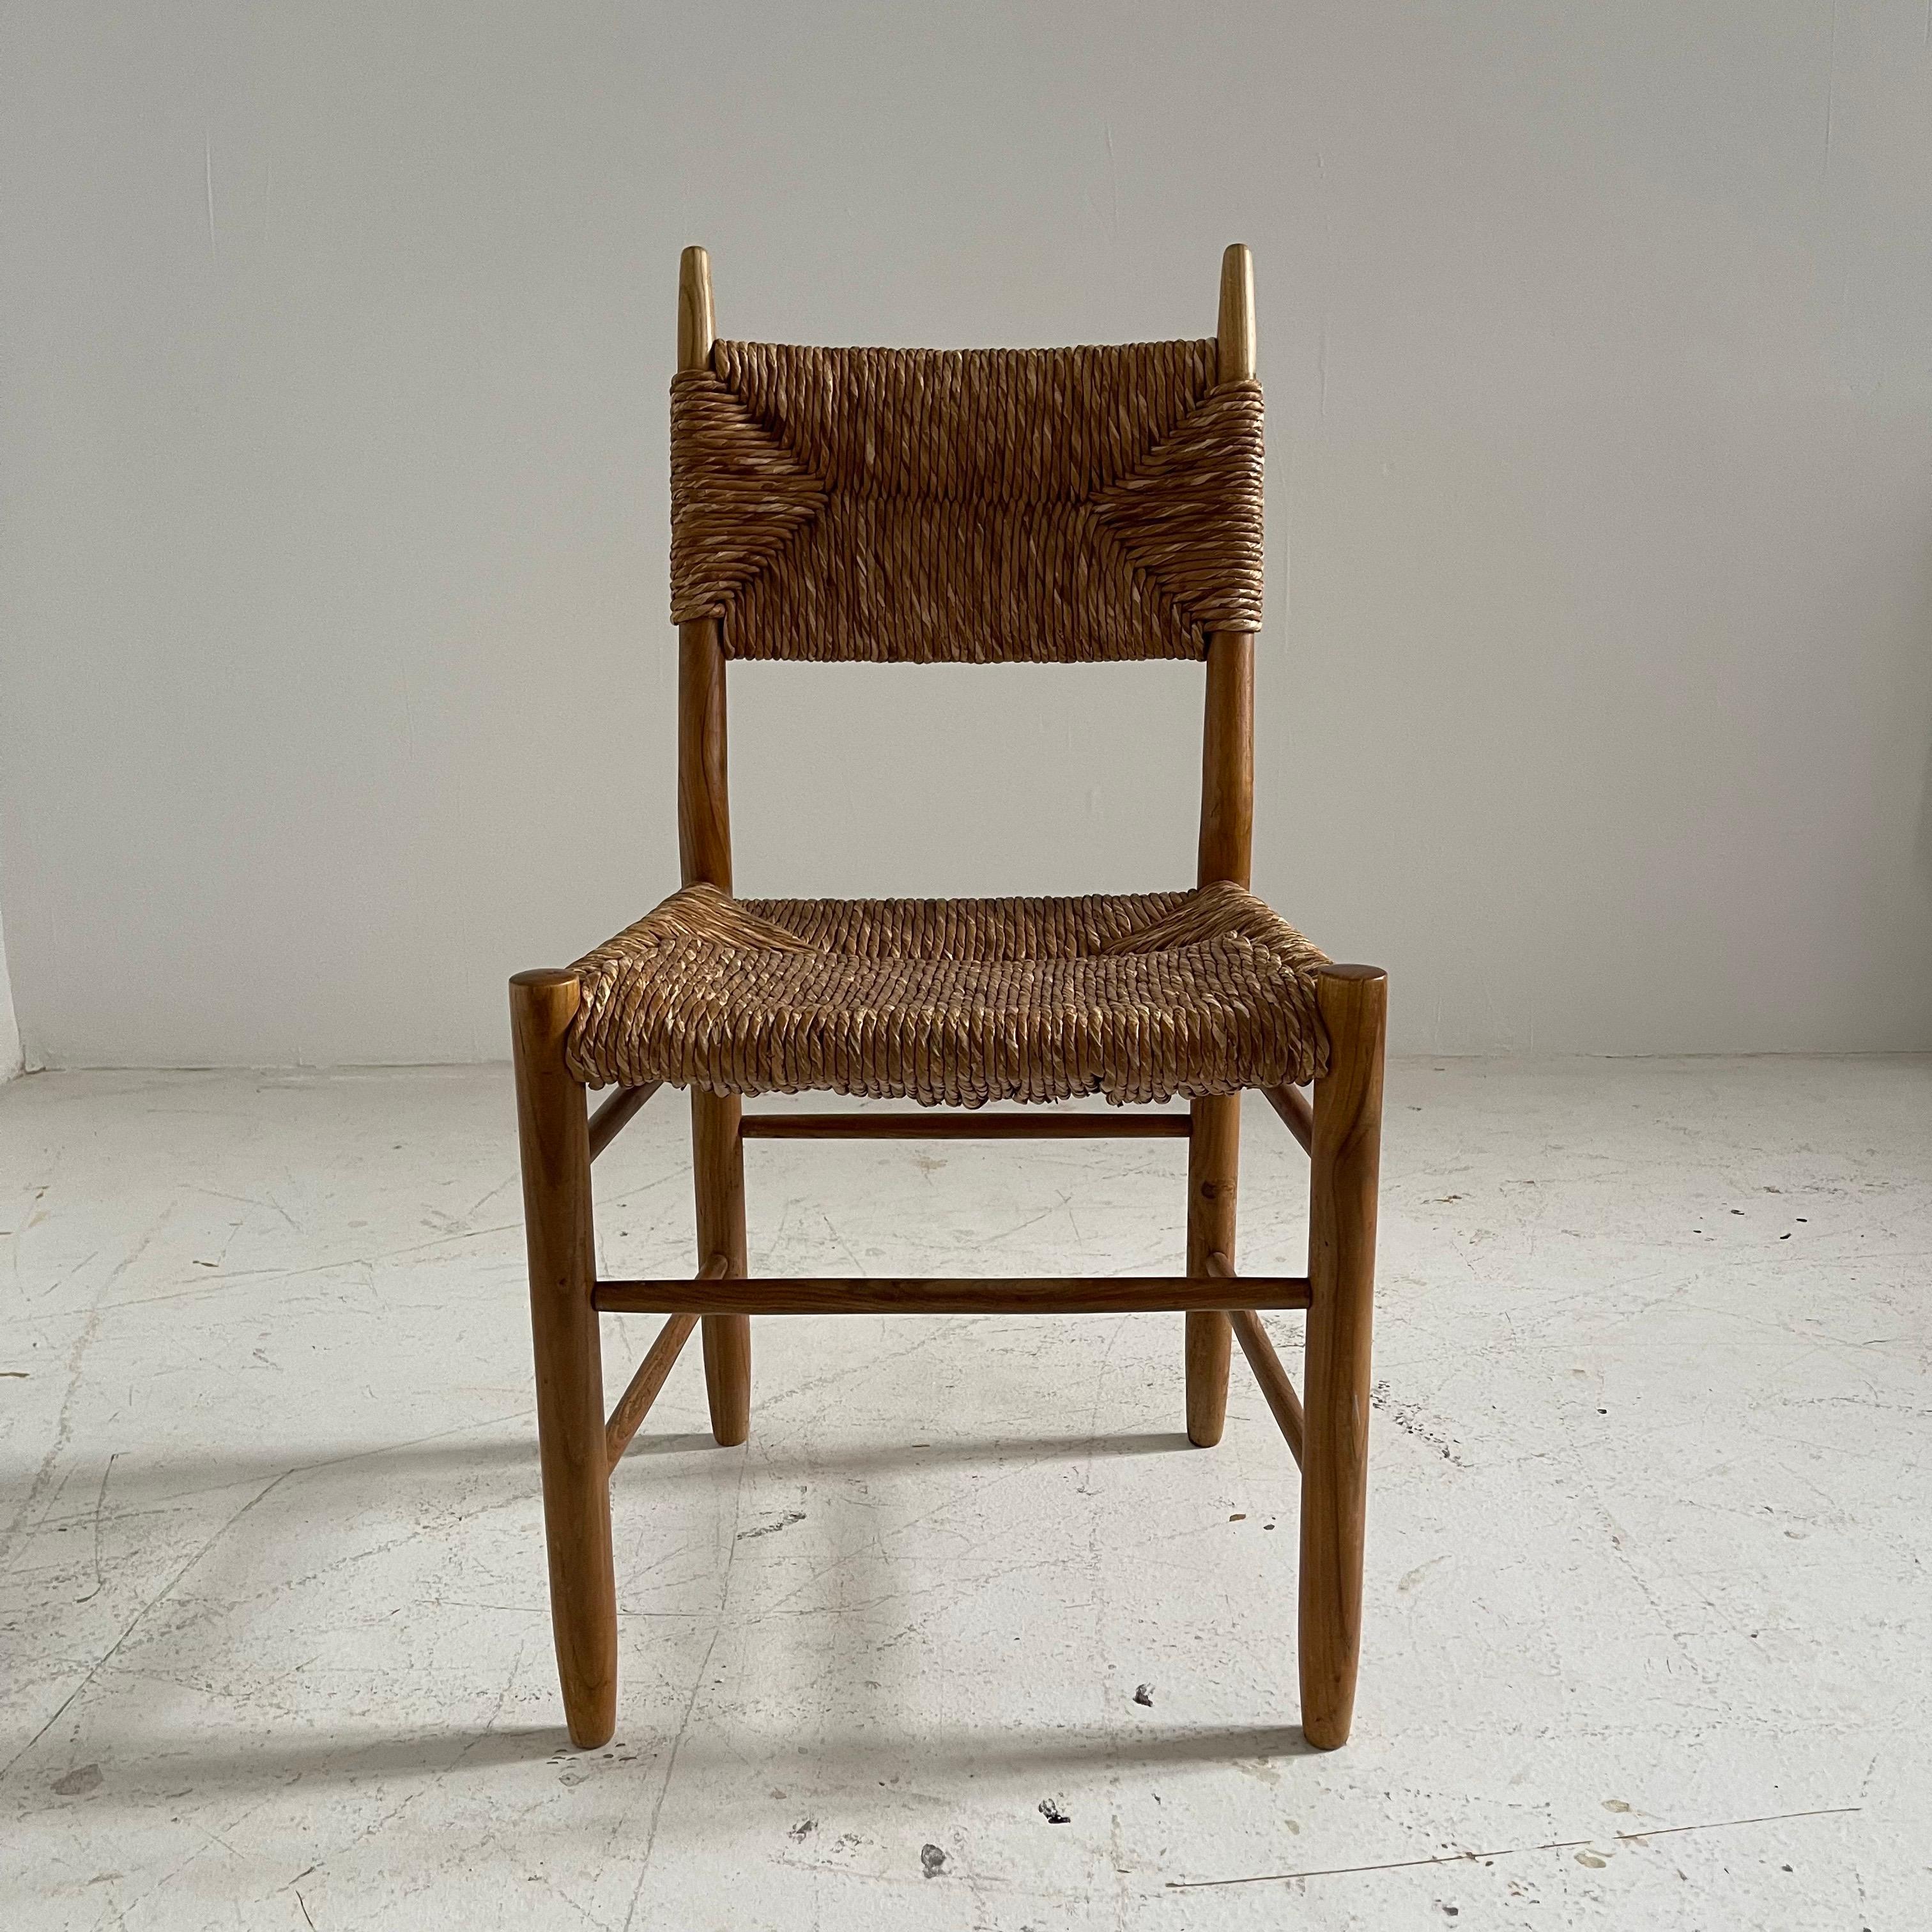 Straw Charlotte Perriand Bauche No. 19 Chairs for BCB, Set of Four, France 1955 For Sale